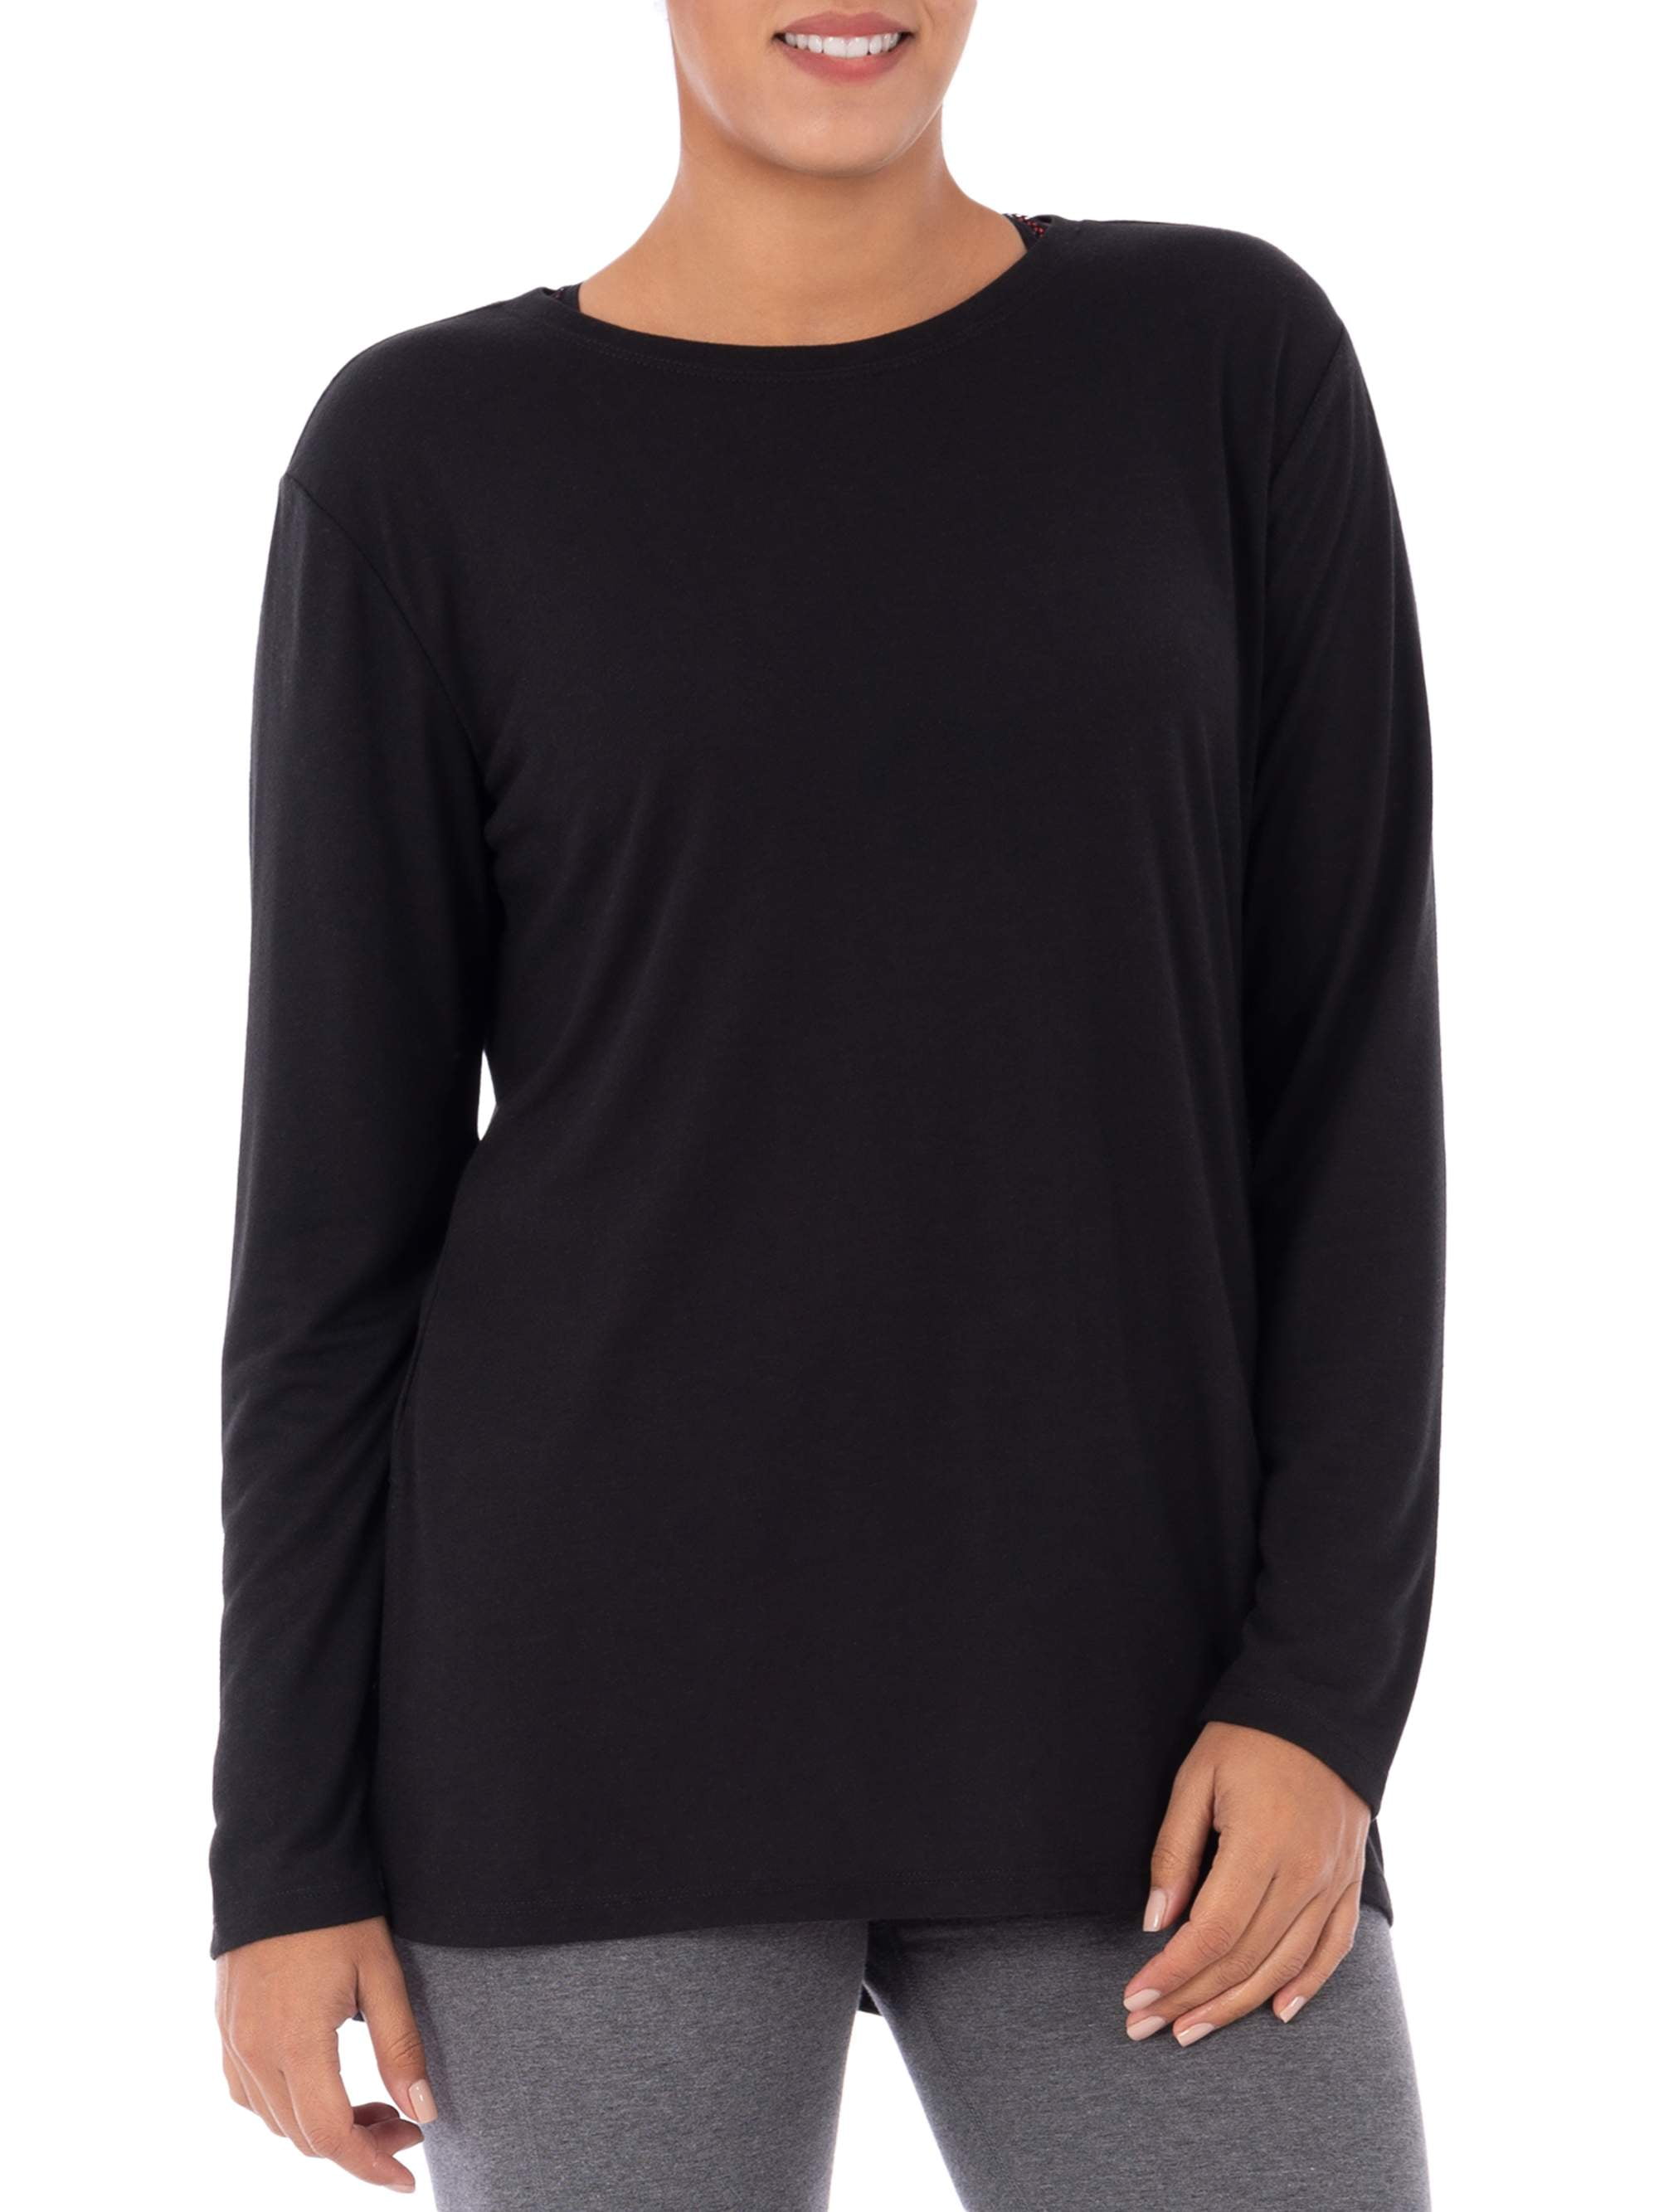 Athletic Works - Athletic Works Women's Active Long Sleeve Tunic Length ...